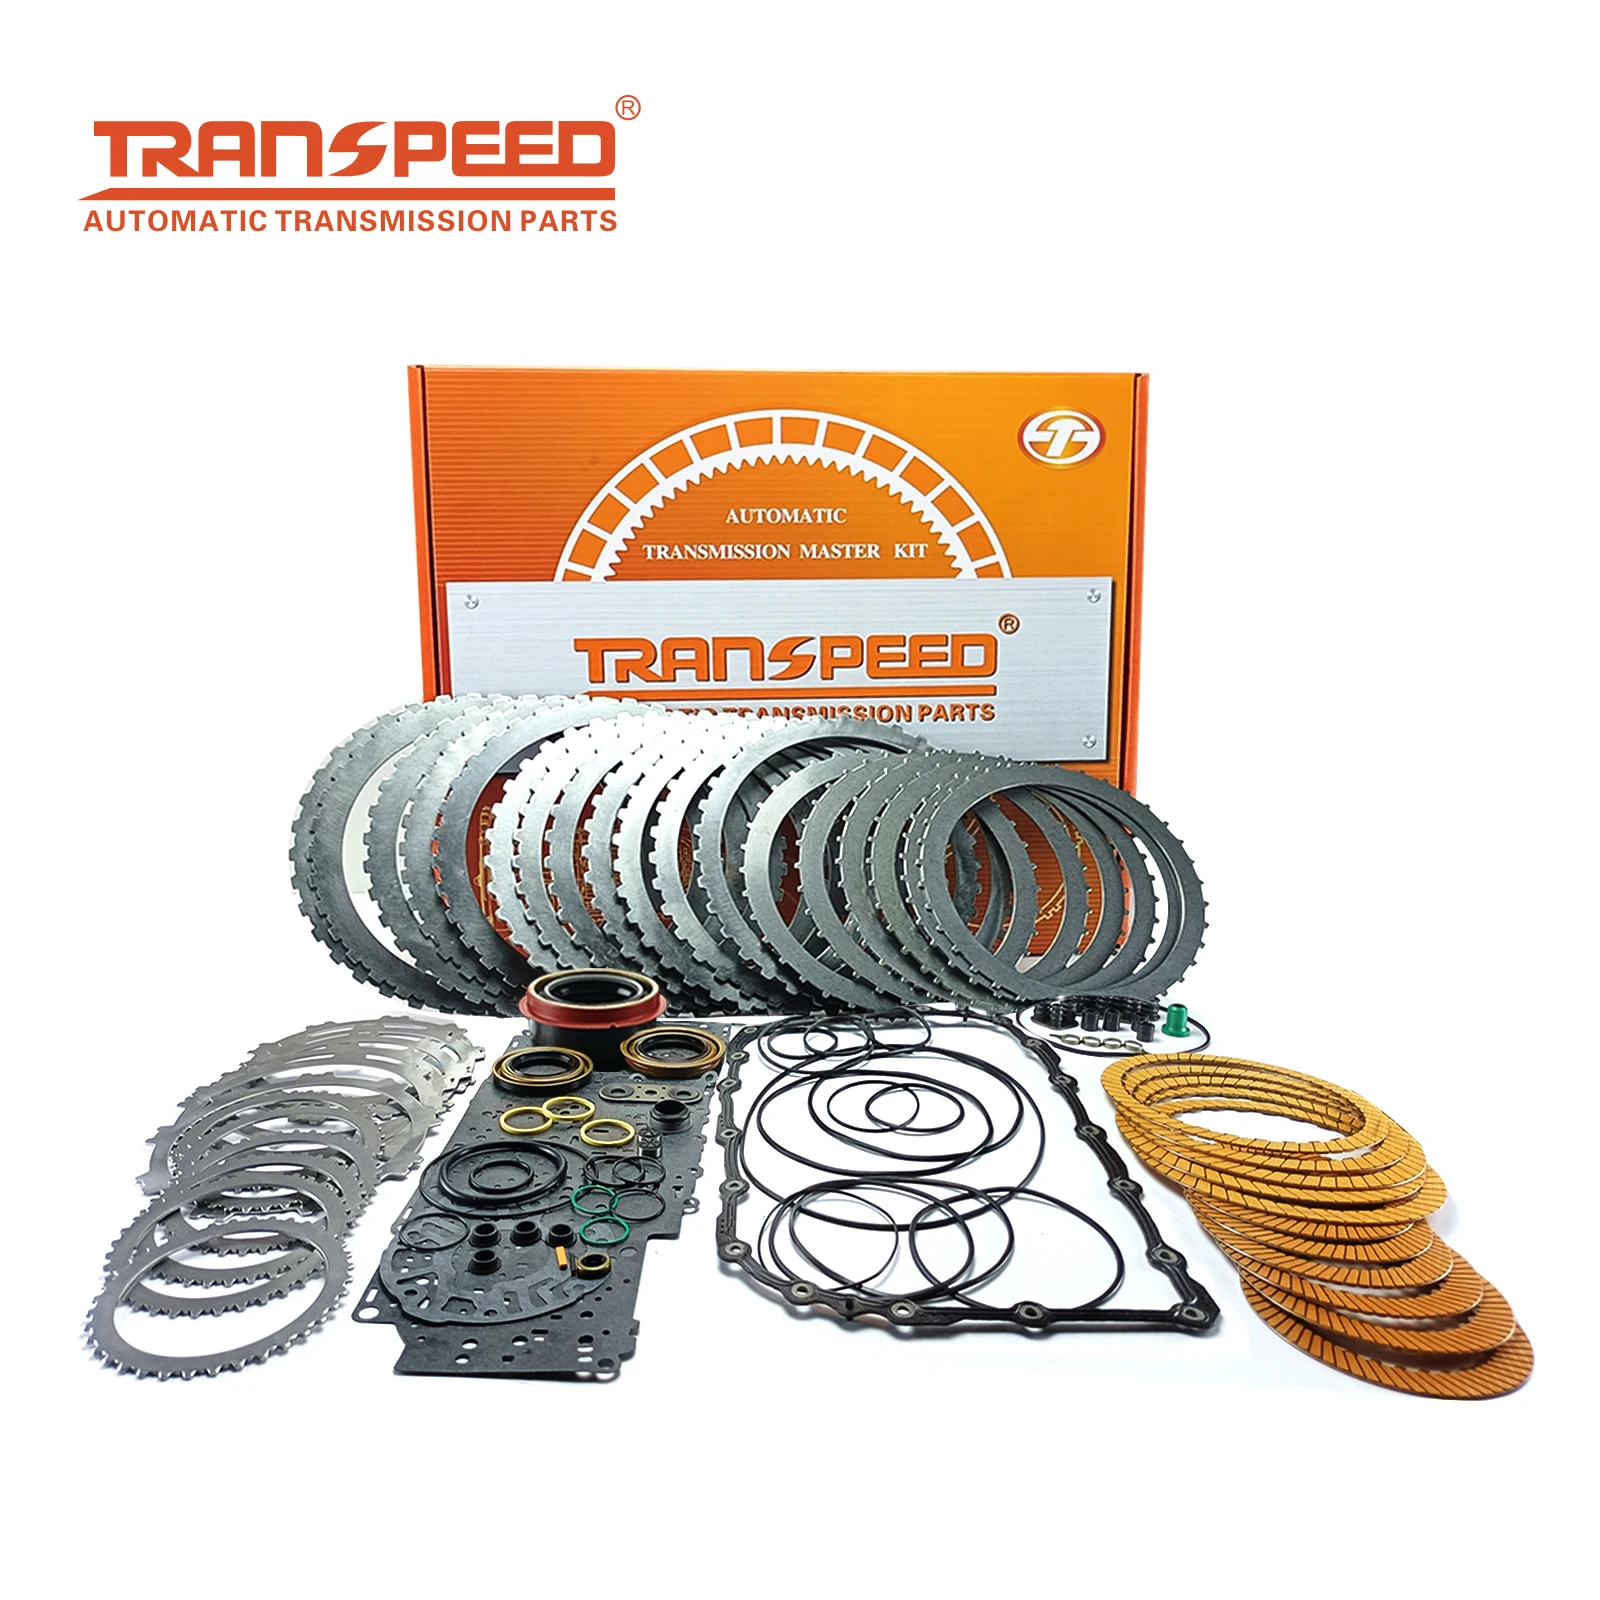 

TRANSPEED 6L80E Automatic Transmission Master Rebuild Friction Steel Kit For CADILLAC CHEVY SUBURBAN YUKON Car Accessories